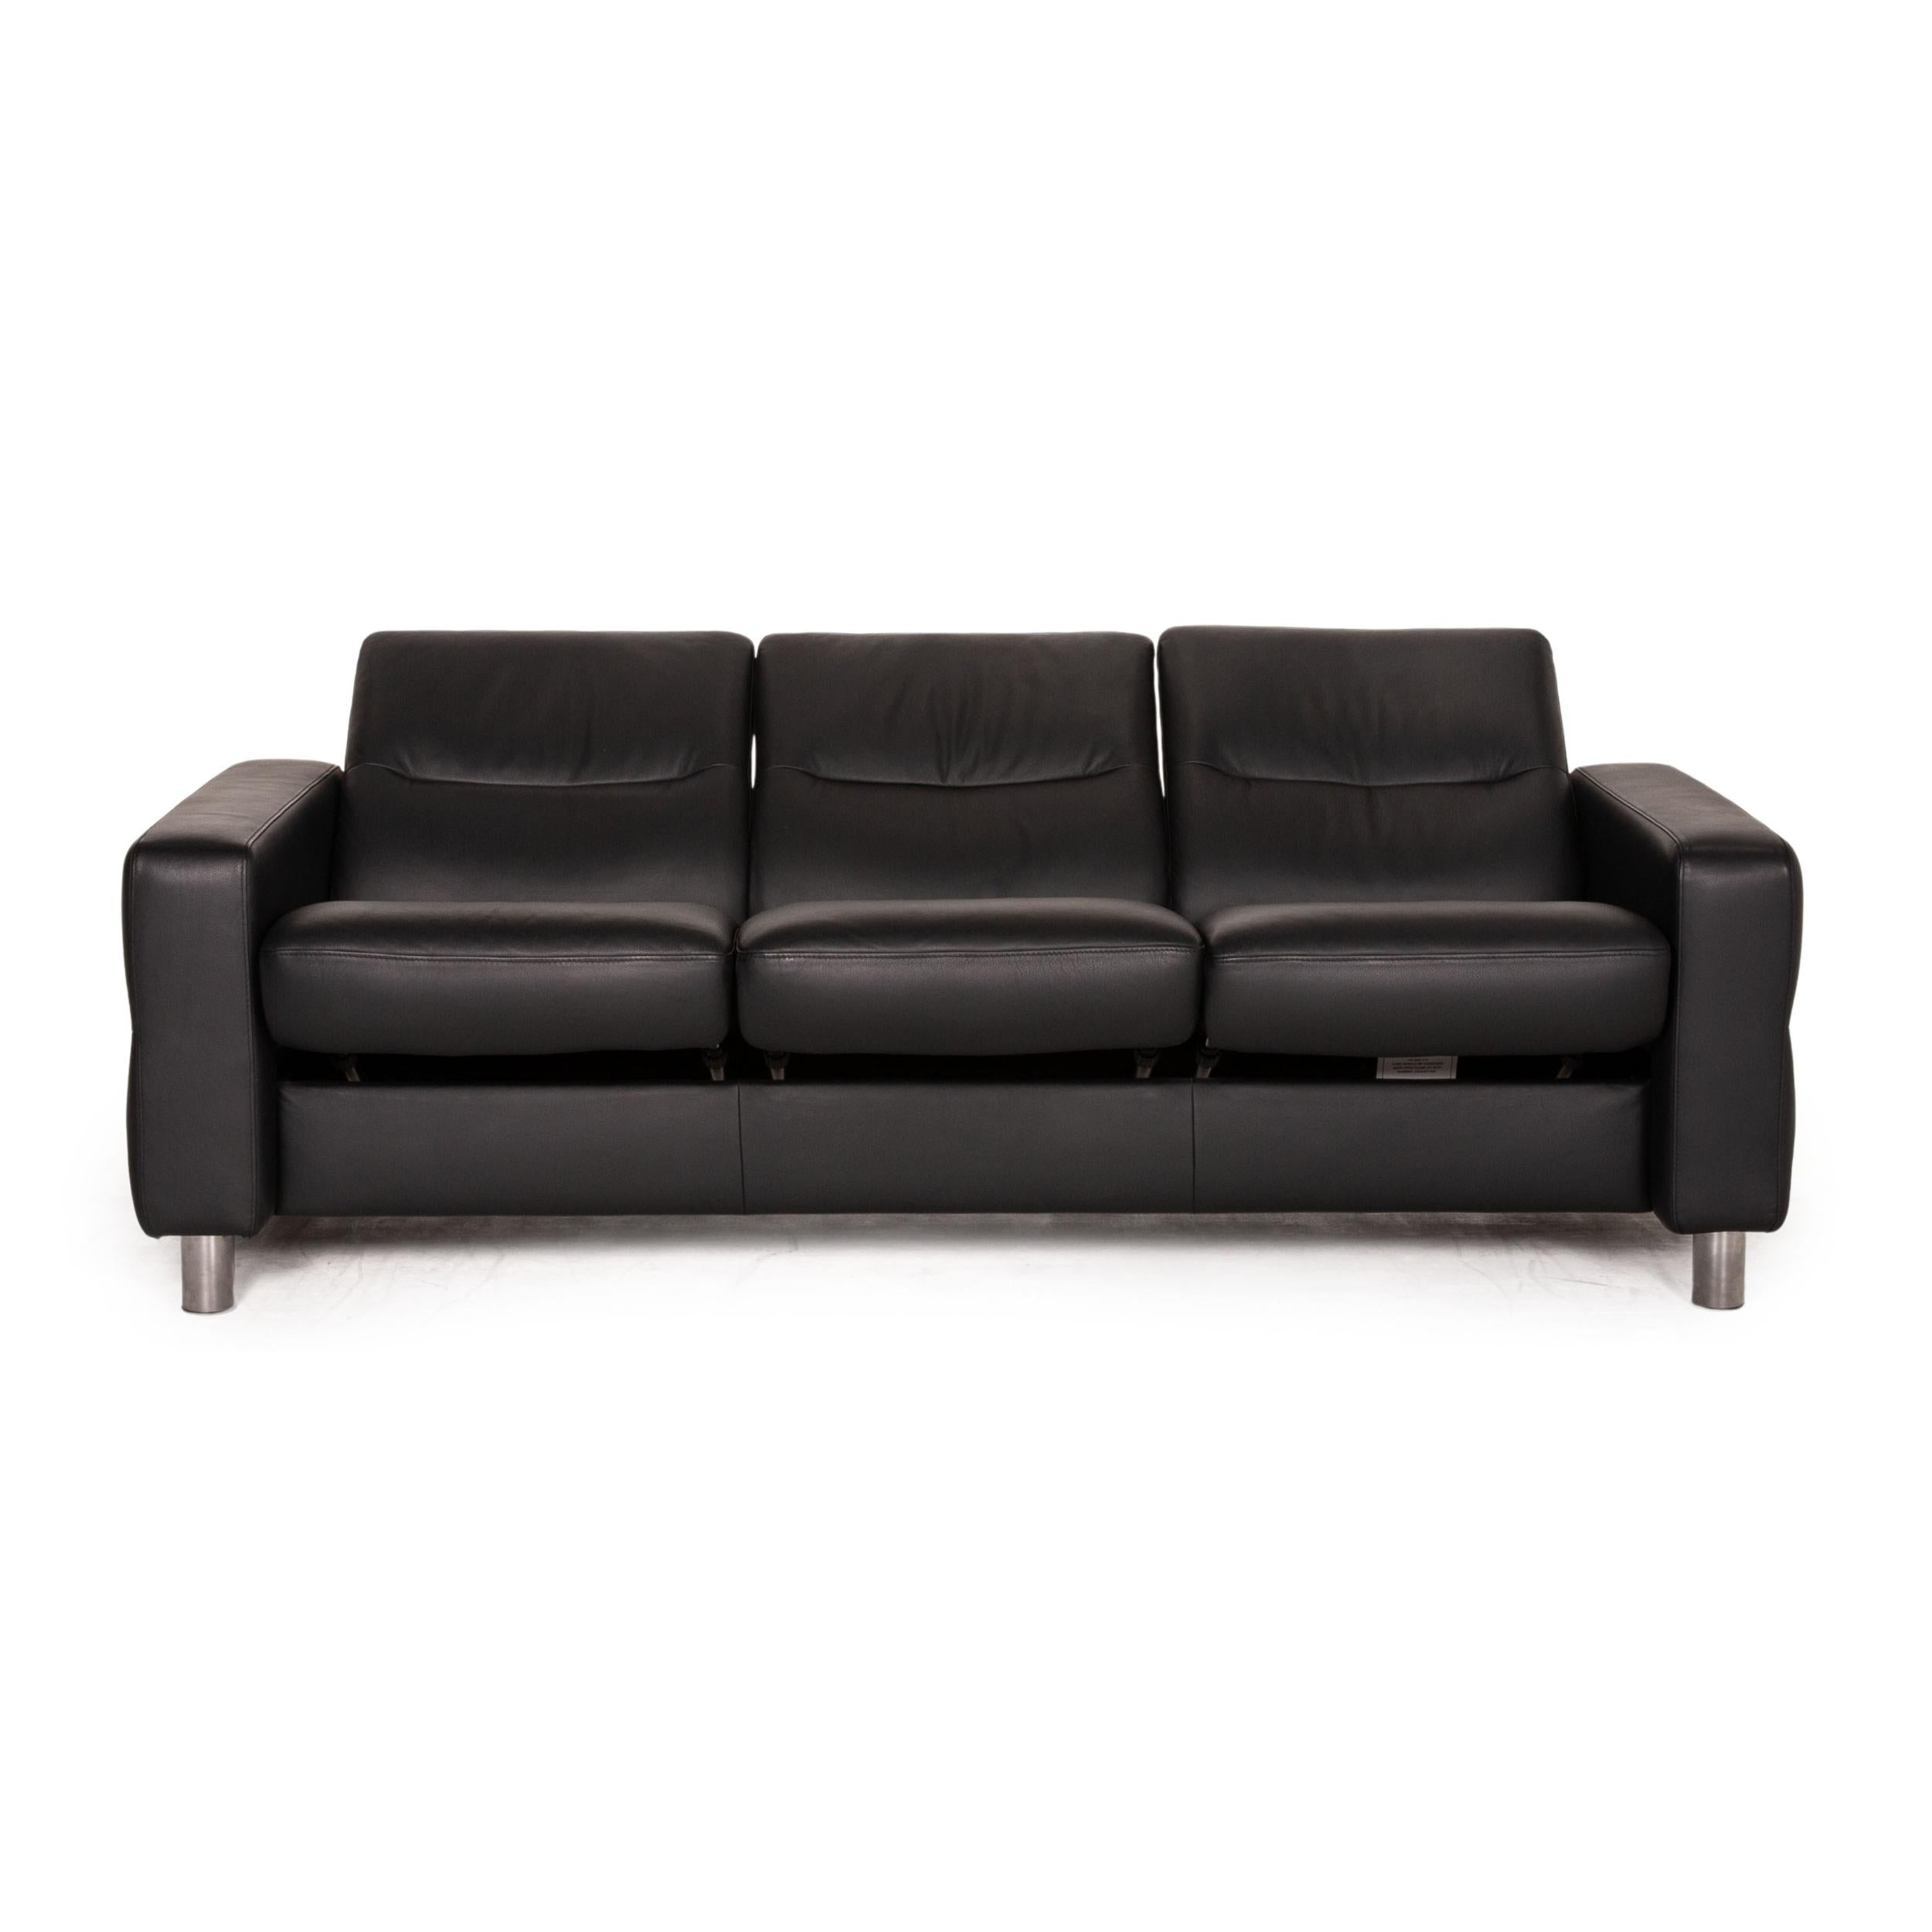 Modern Stressless Waver Three Seater Leather Sofa Black Couch